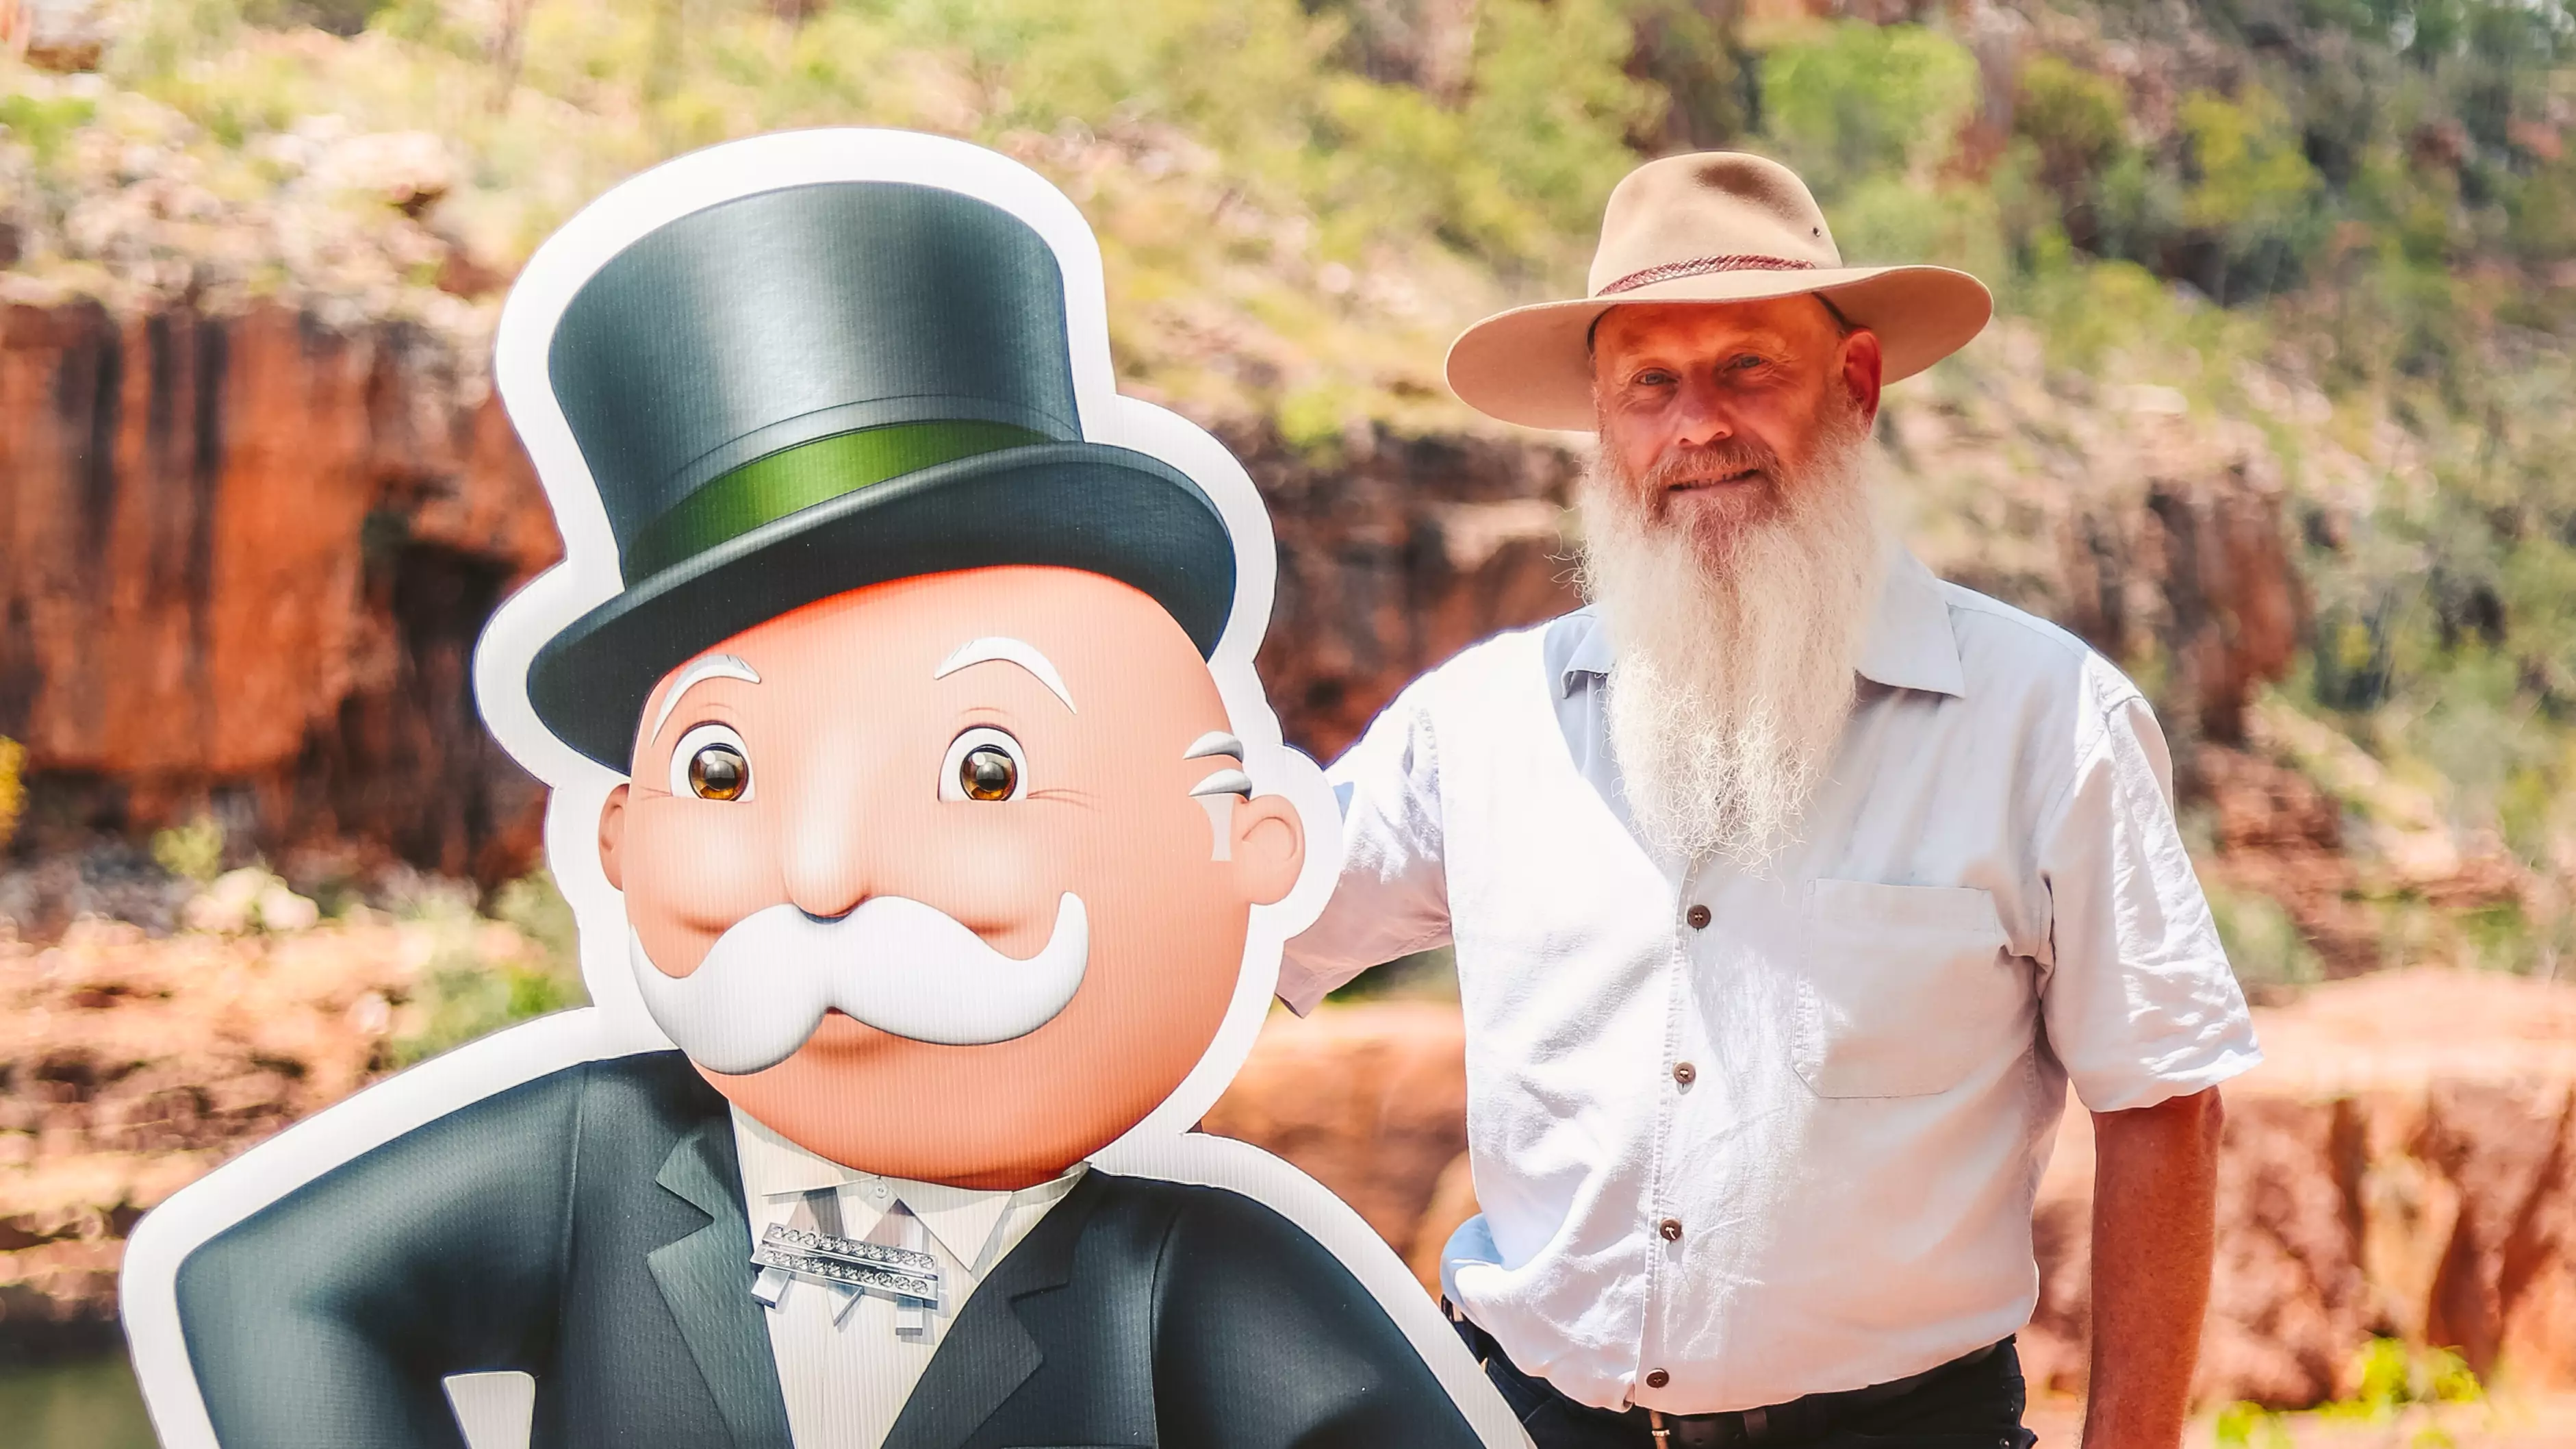 Monopoly Board Featuring Disaster Hit Areas Of Australia Is Being Released For Charity